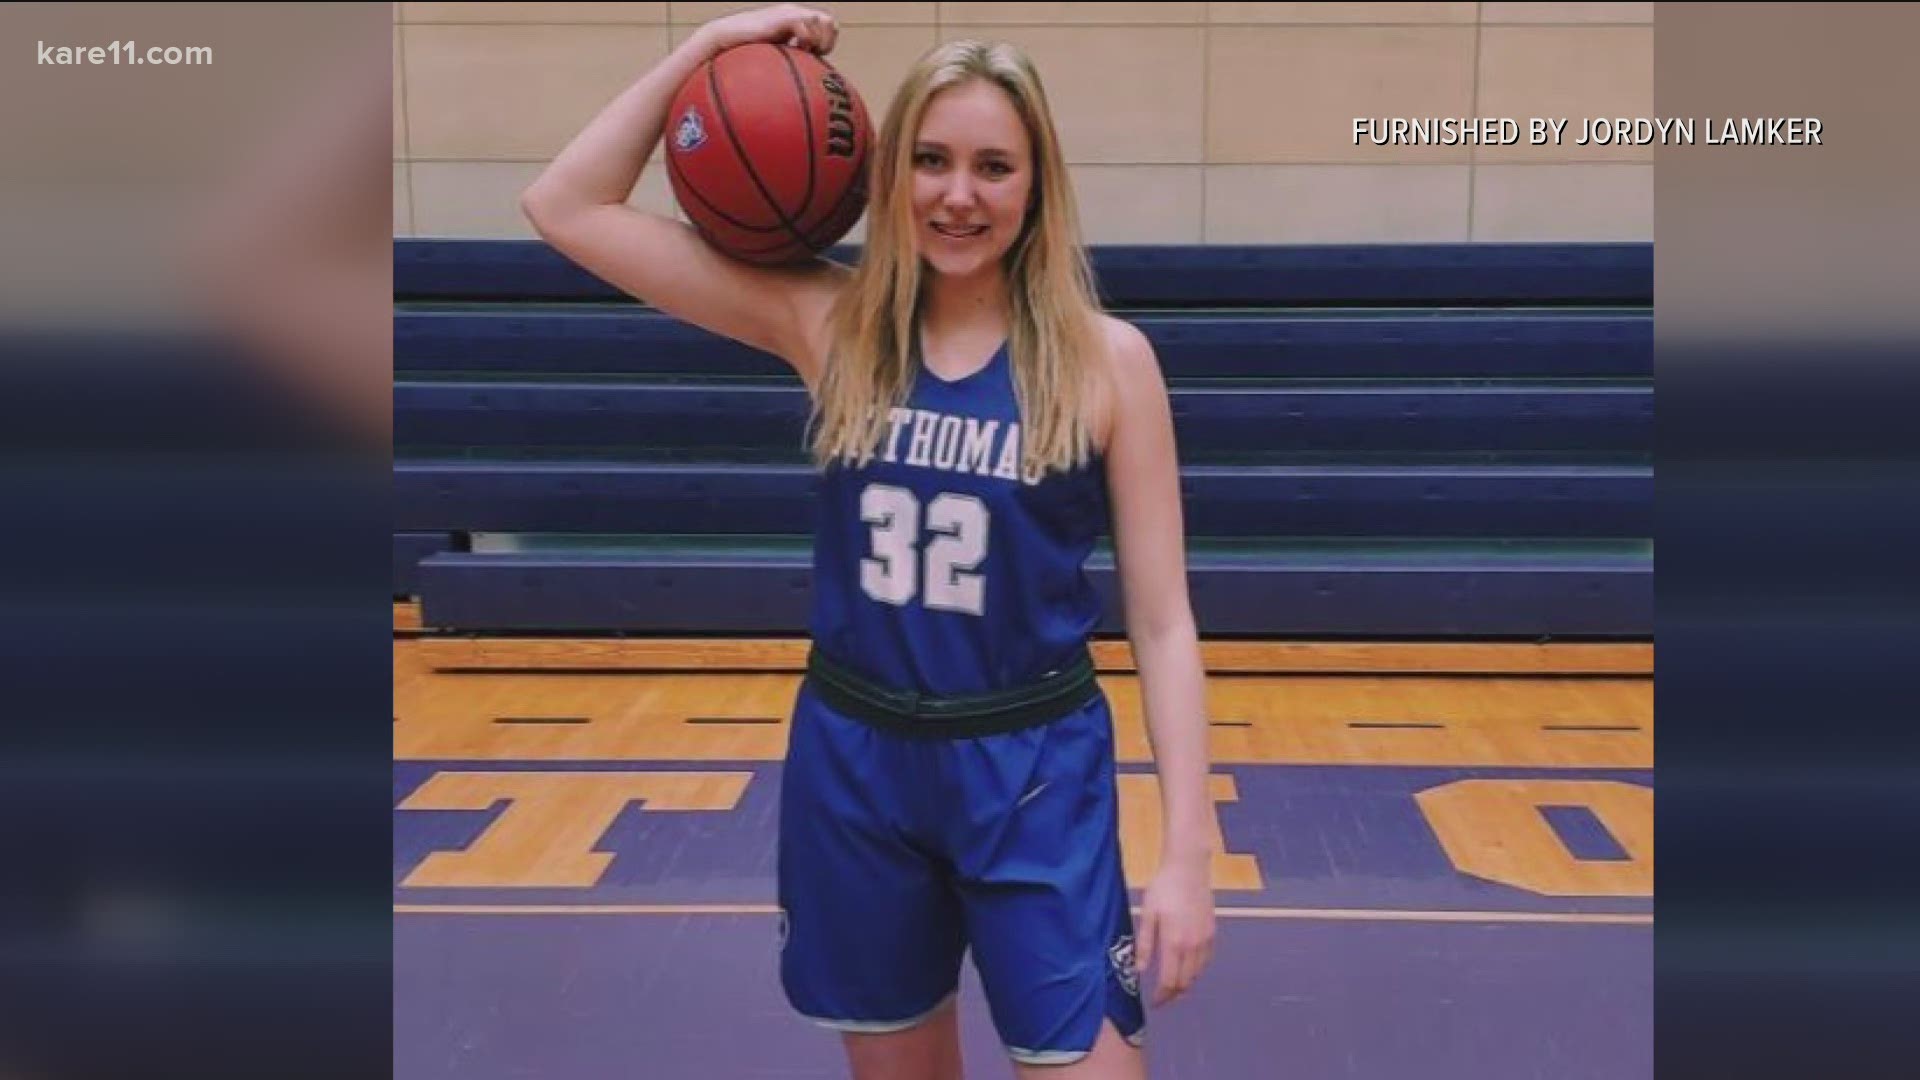 The Maple Grove high school basketball star says she's excited to carry on a family legacy at St. Thomas